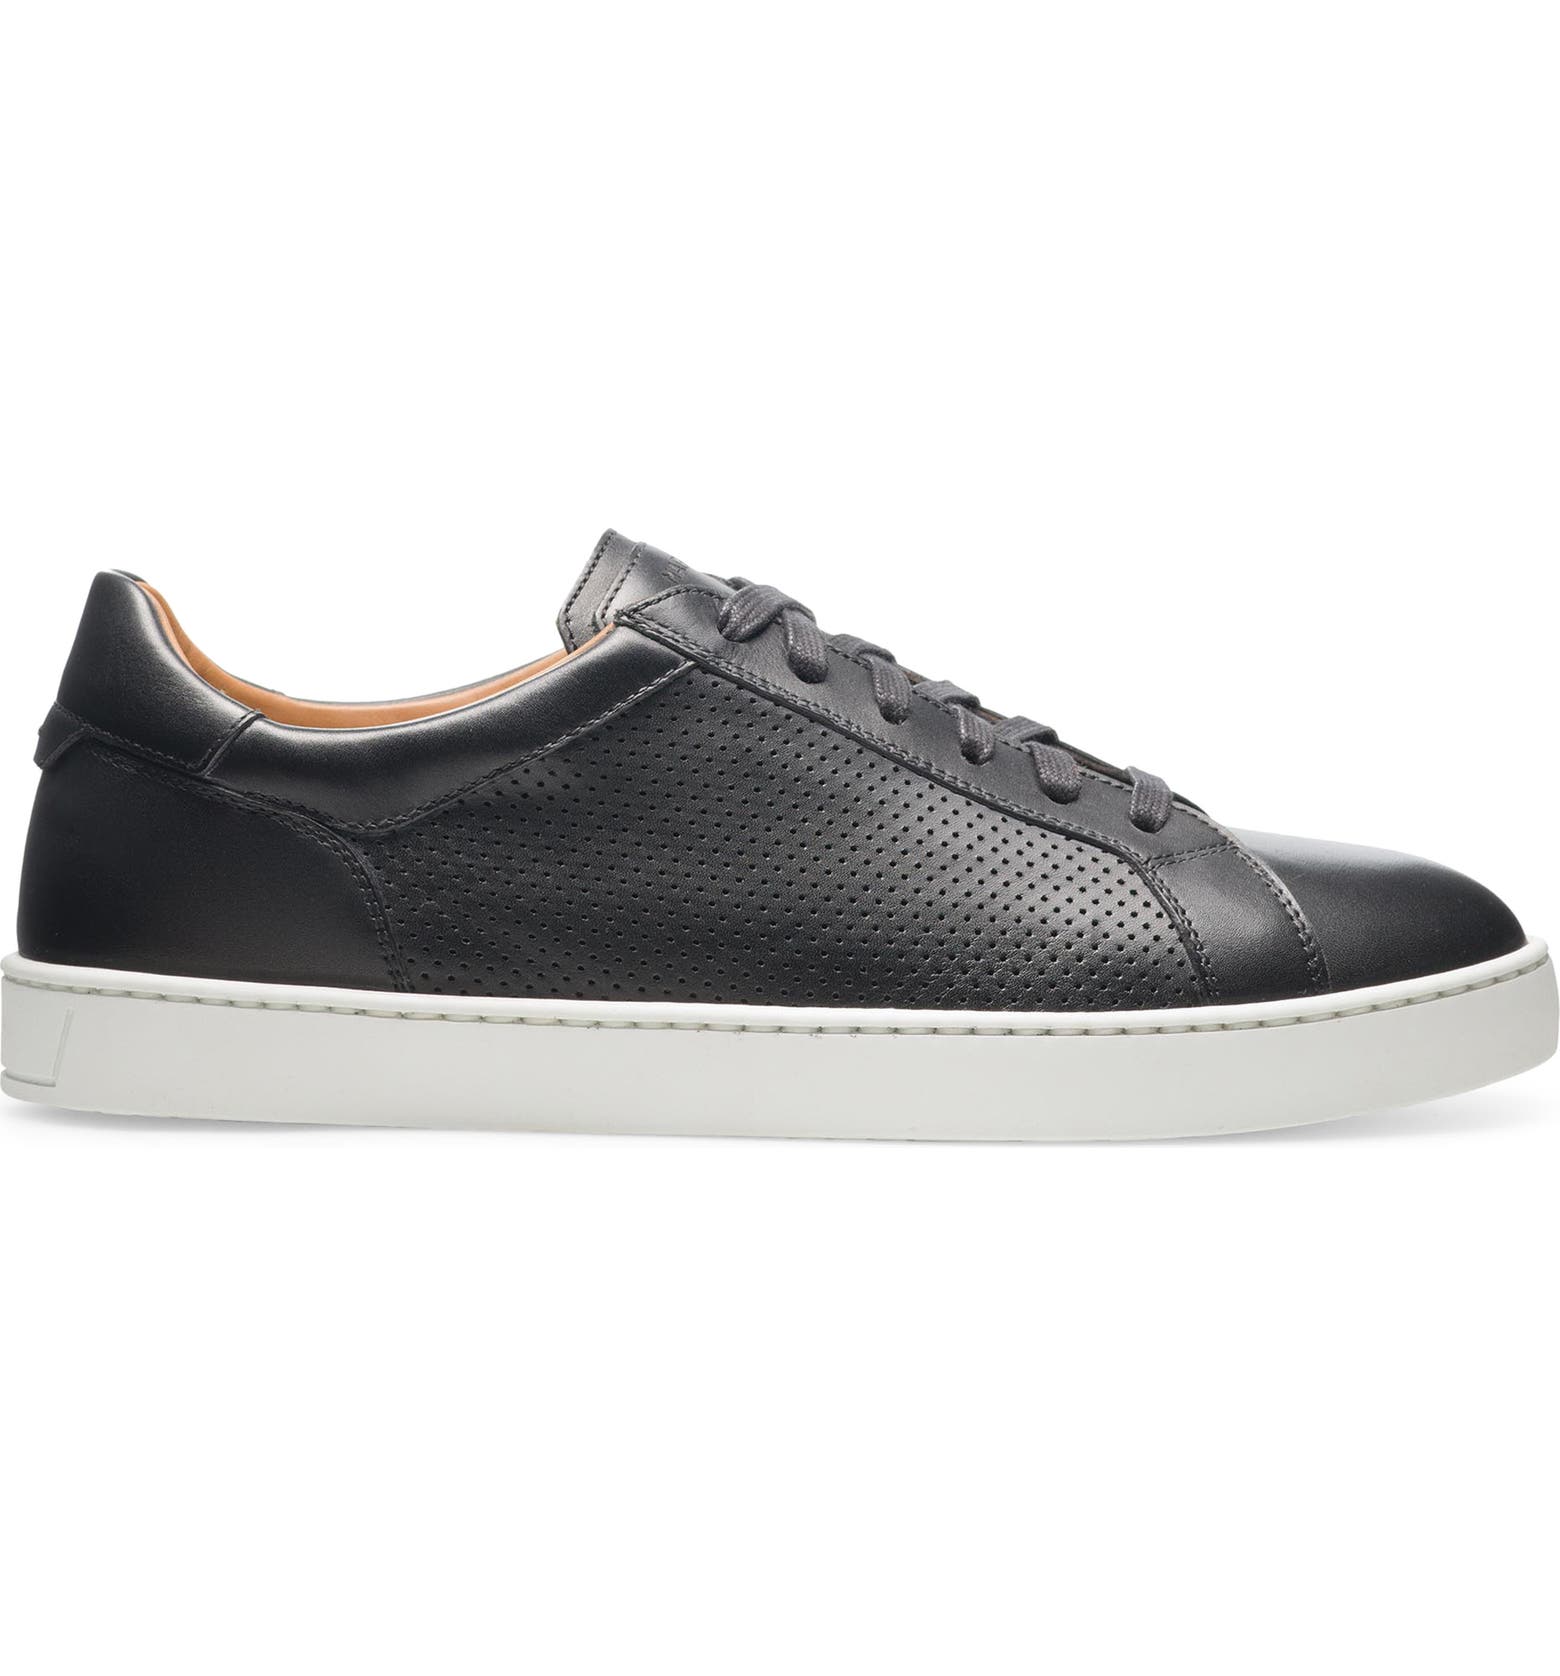 Magnanni Costa Perforated Leather Low Top Sneaker (Men) | Nordstrom